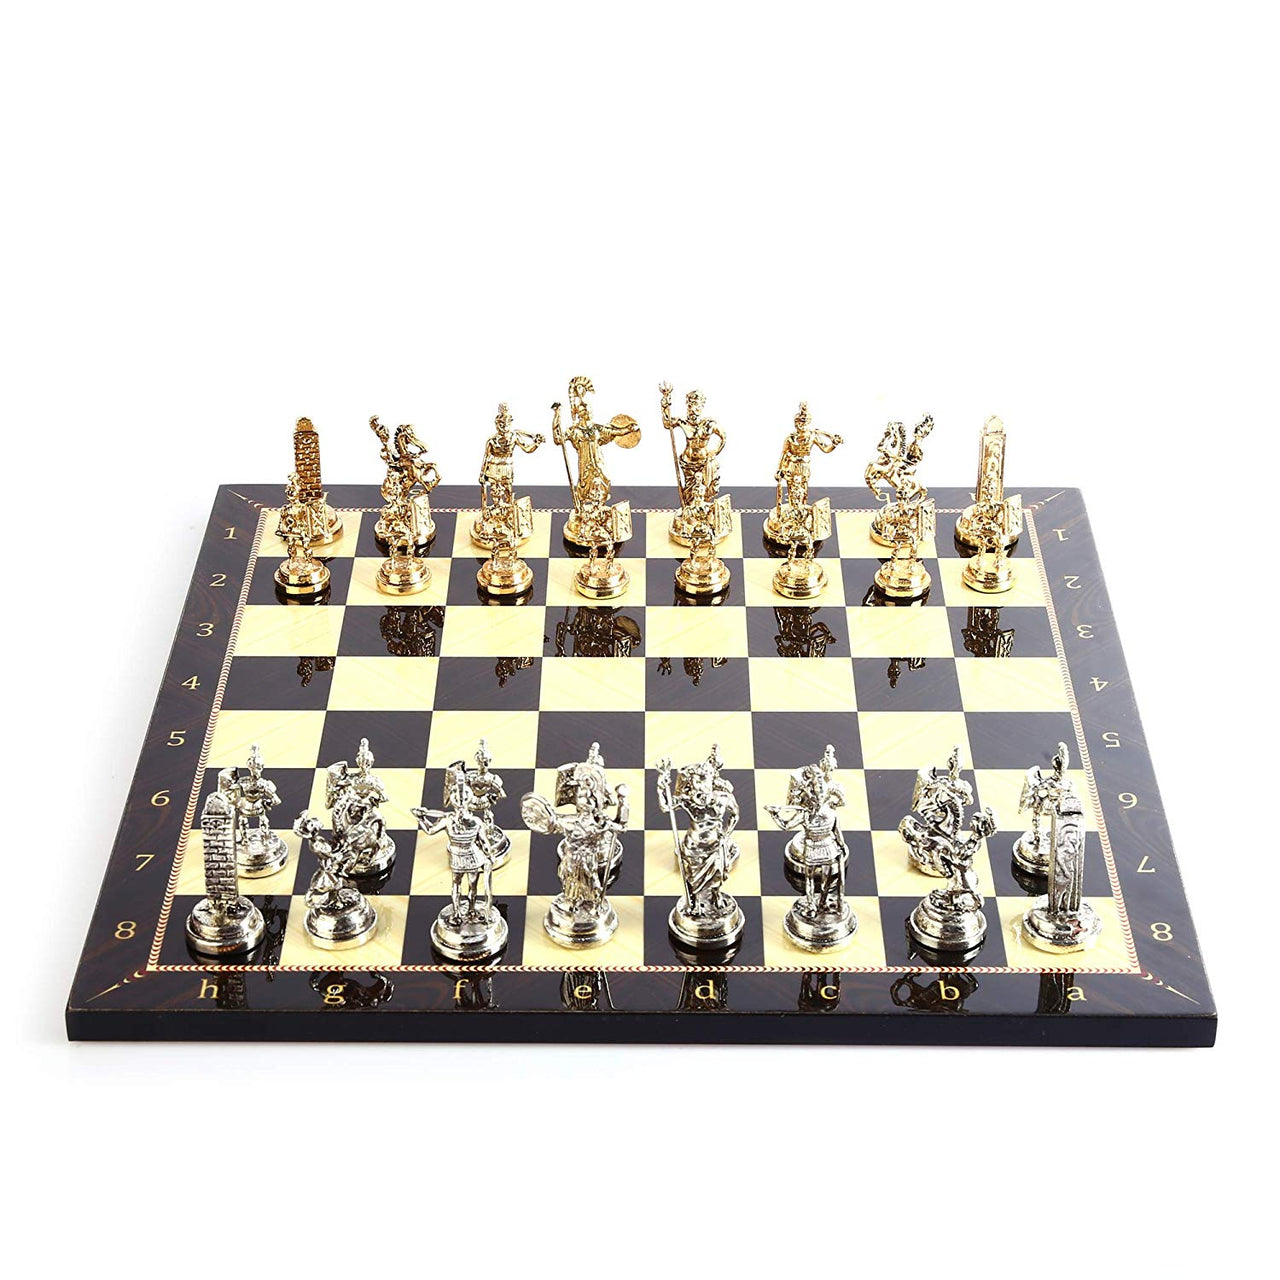 Rome Figures Metal Chess Set with Walnut Patterned Wood Chess Board Sculptures and Statues